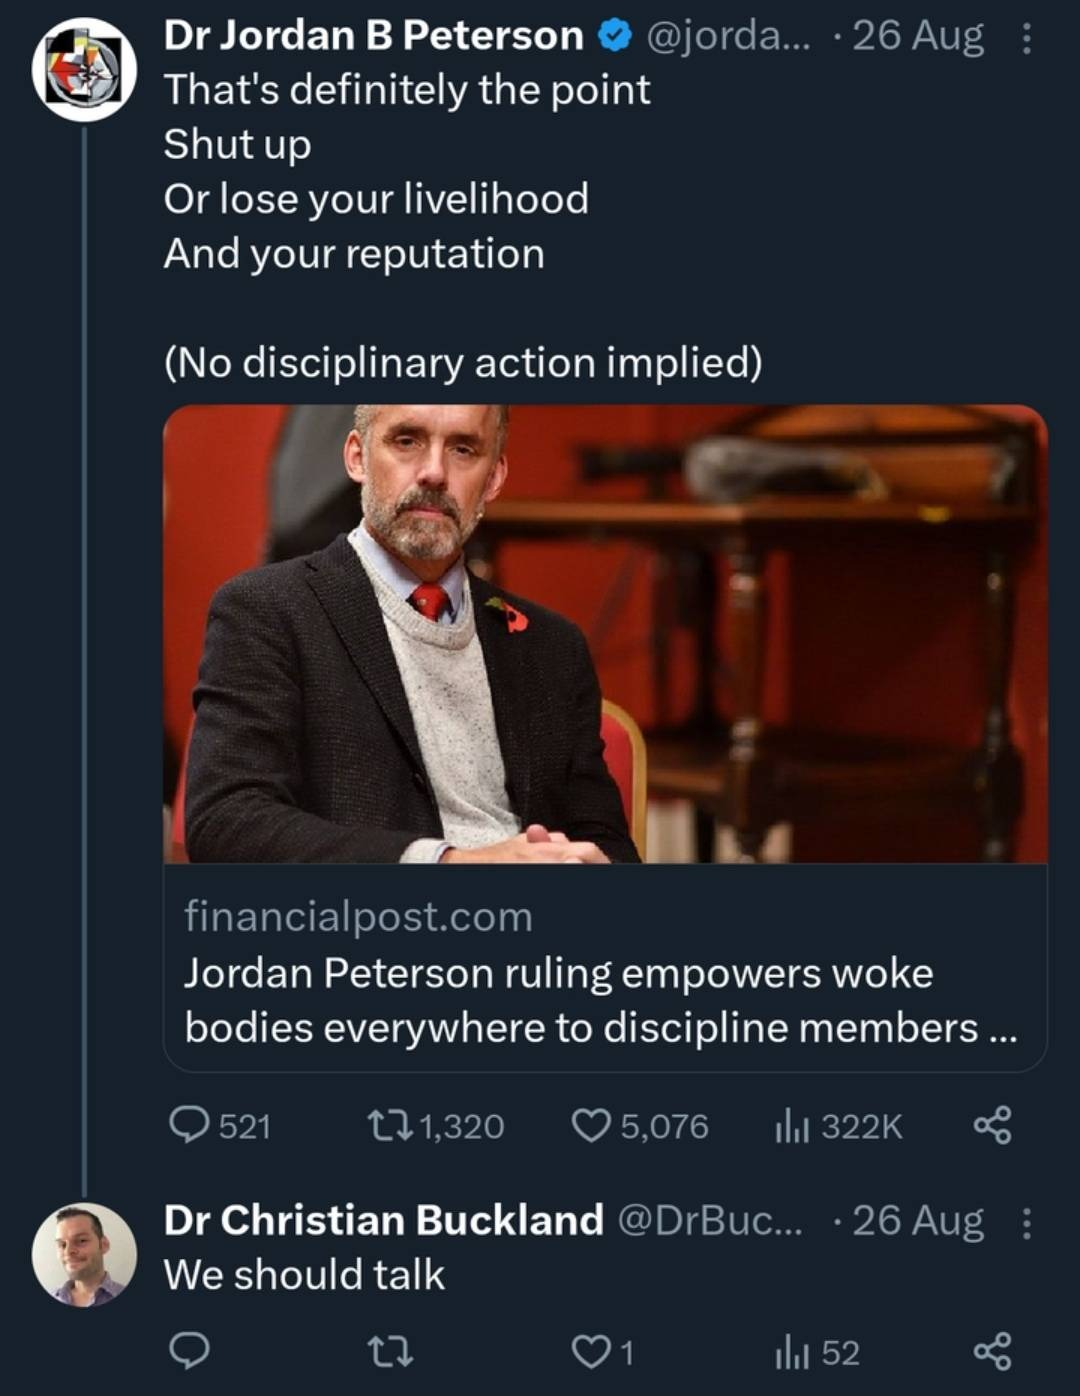 Twitter screenshot. Dr Jordan B Peterson: "That's definitely the point. Shut up. Or lose your livelihood. And youre reputation. (No disciplinary action implied)." Dr Christian Buckland: We should talk